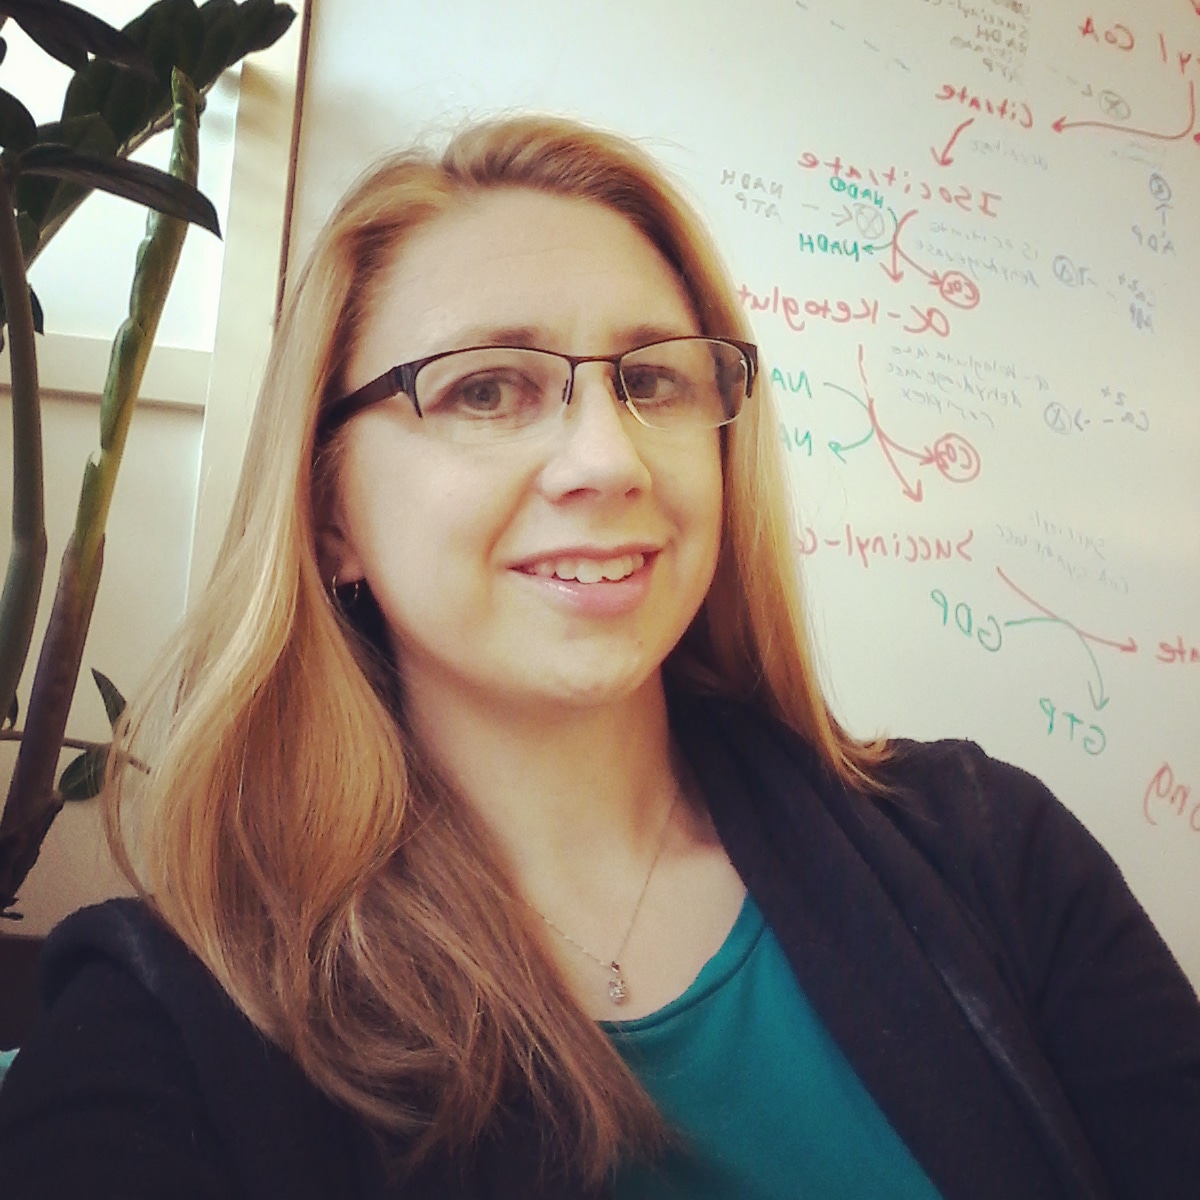 A white woman with glasses and long hair sits in front of a white board with a biochemical cycle sketched on it.